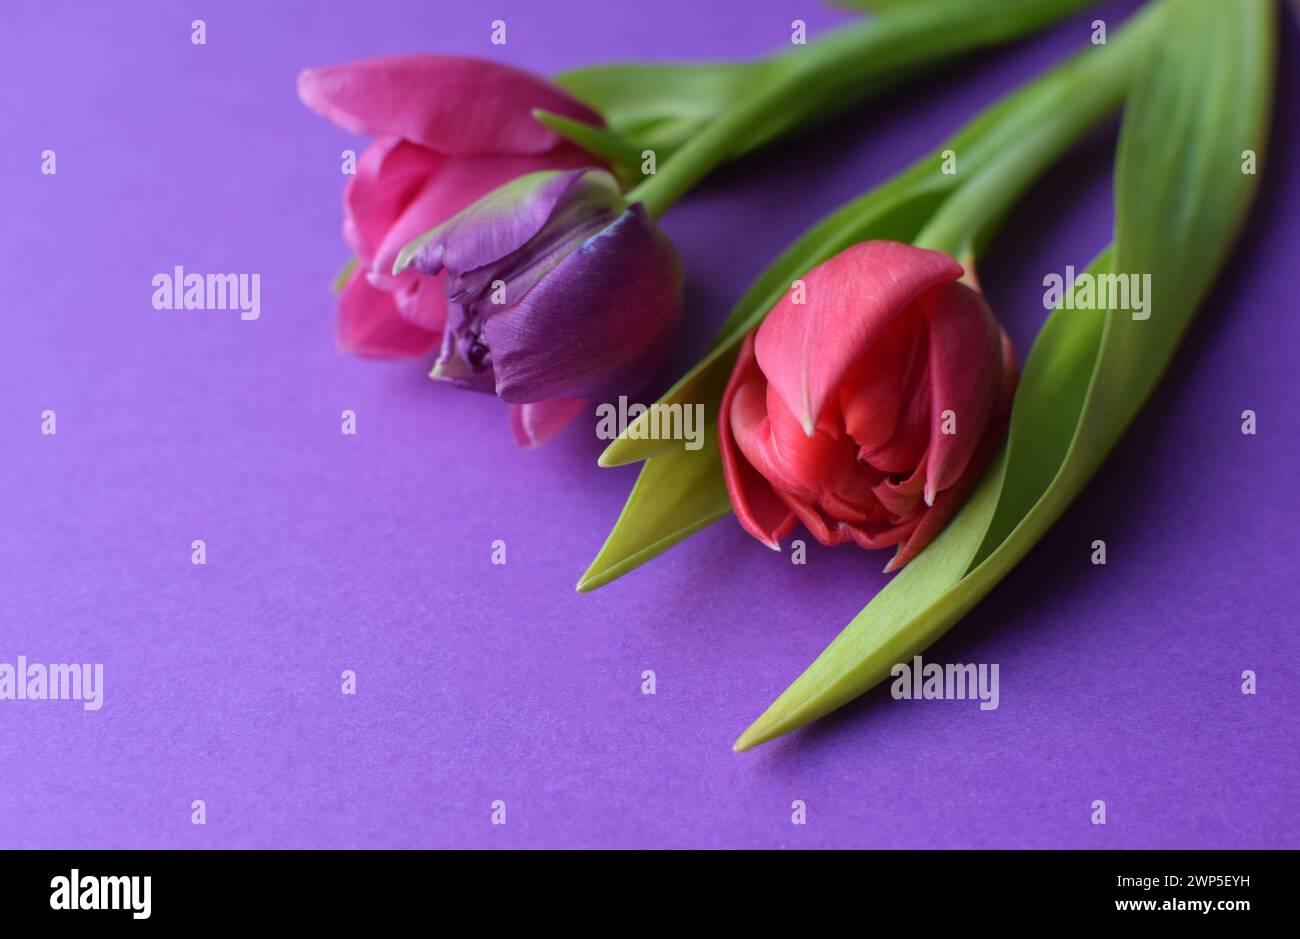 Bouquet of colorful spring tulips for Mother's Day or Women's Day on a purple background. Top view in flat style. Stock Photo